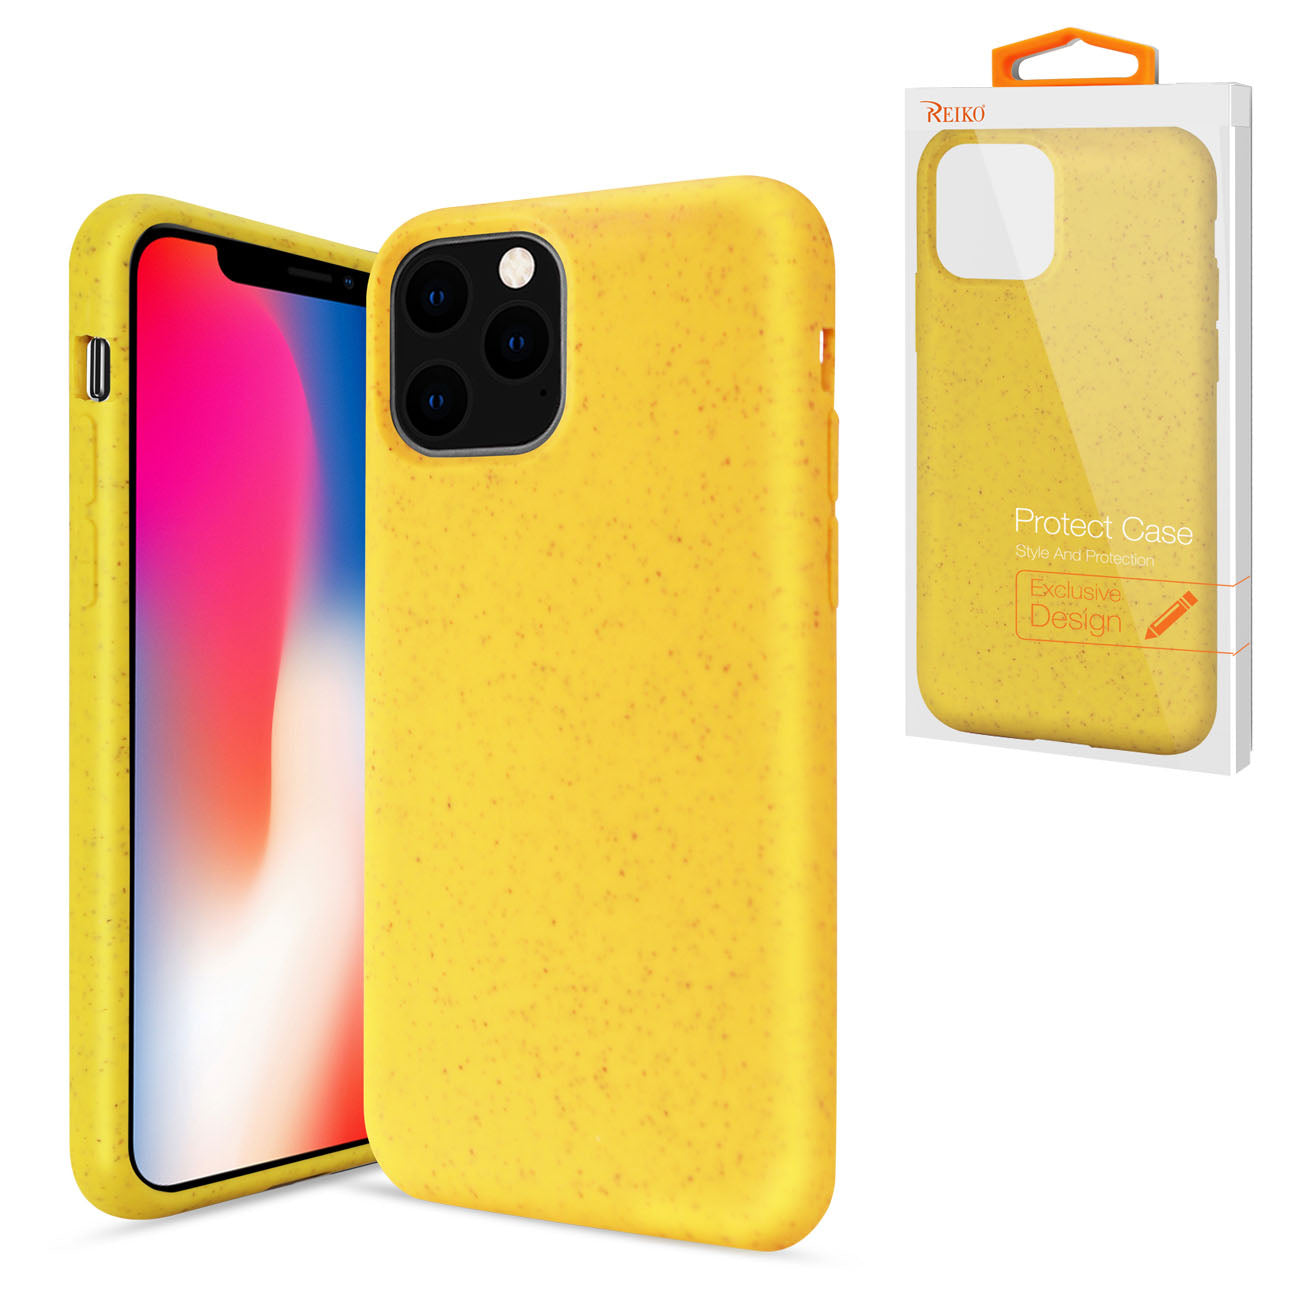 APPLE IPHONE 11 PRO Wheat Bran Material Silicone Phone Case In Yellow